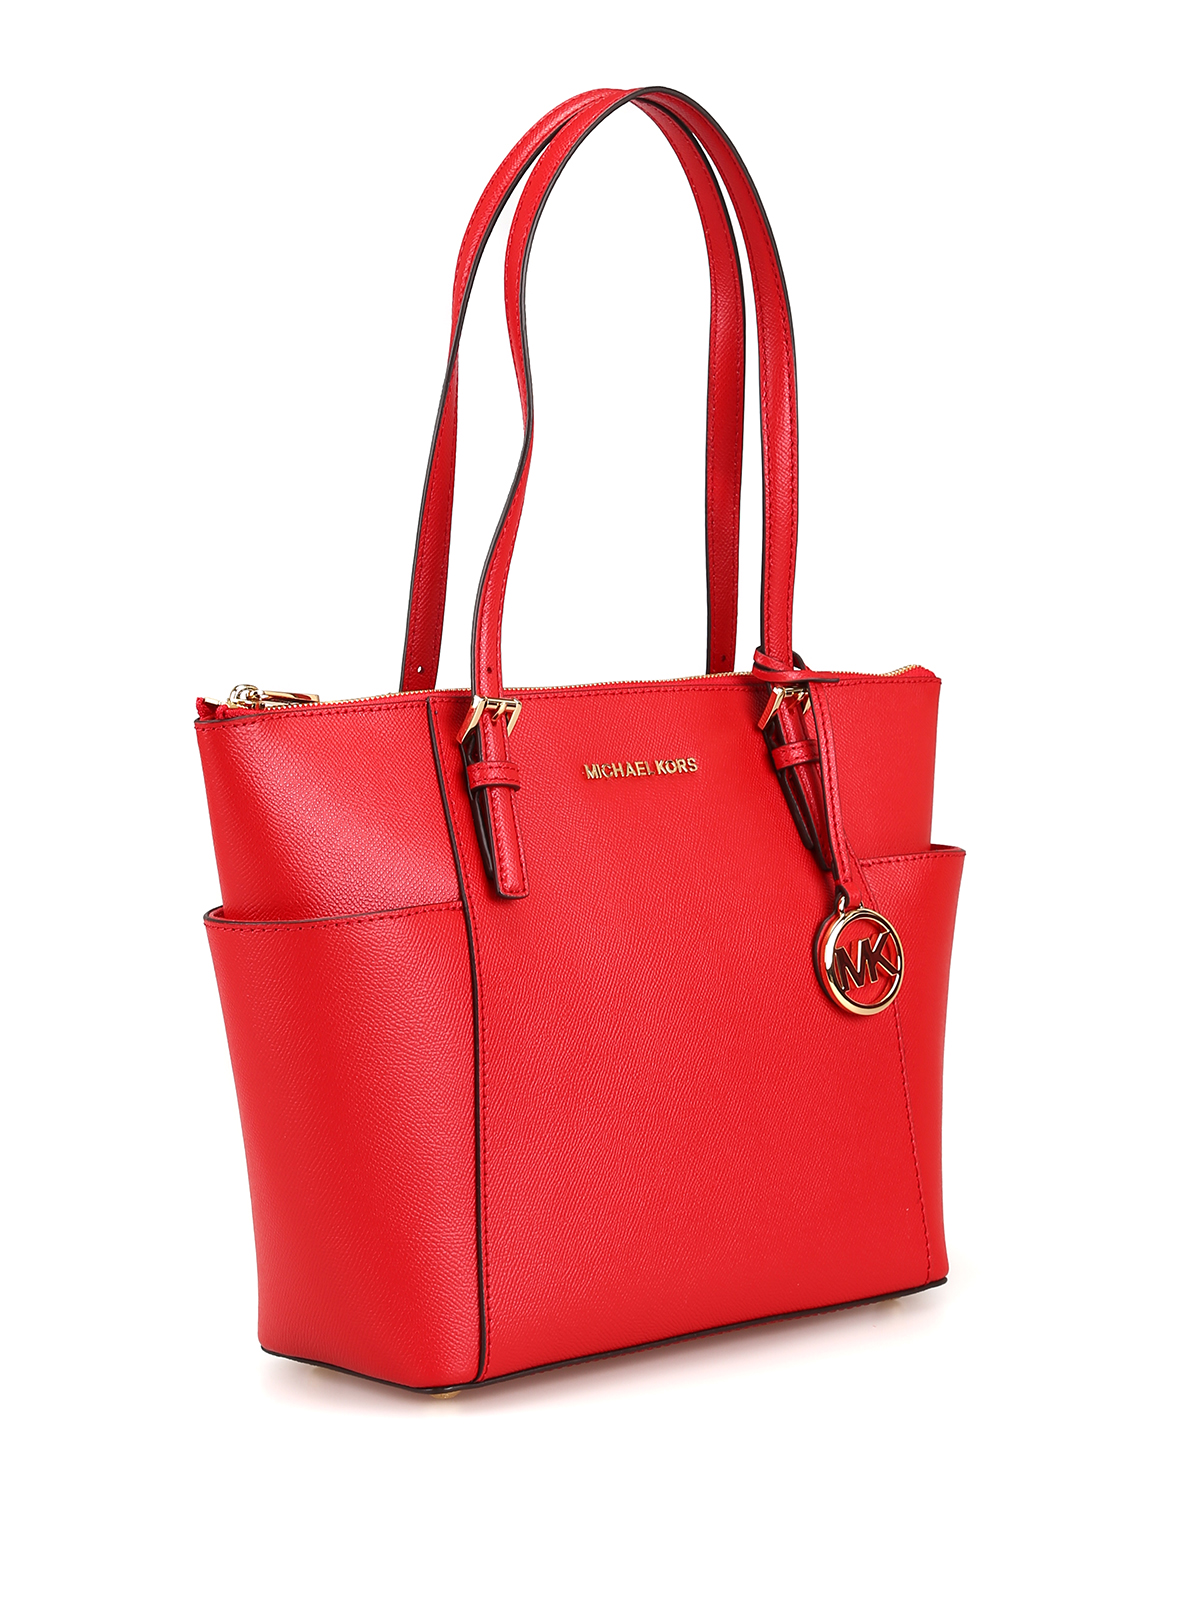 Michael Kors Voyager East/West Tote Bright Red One Size